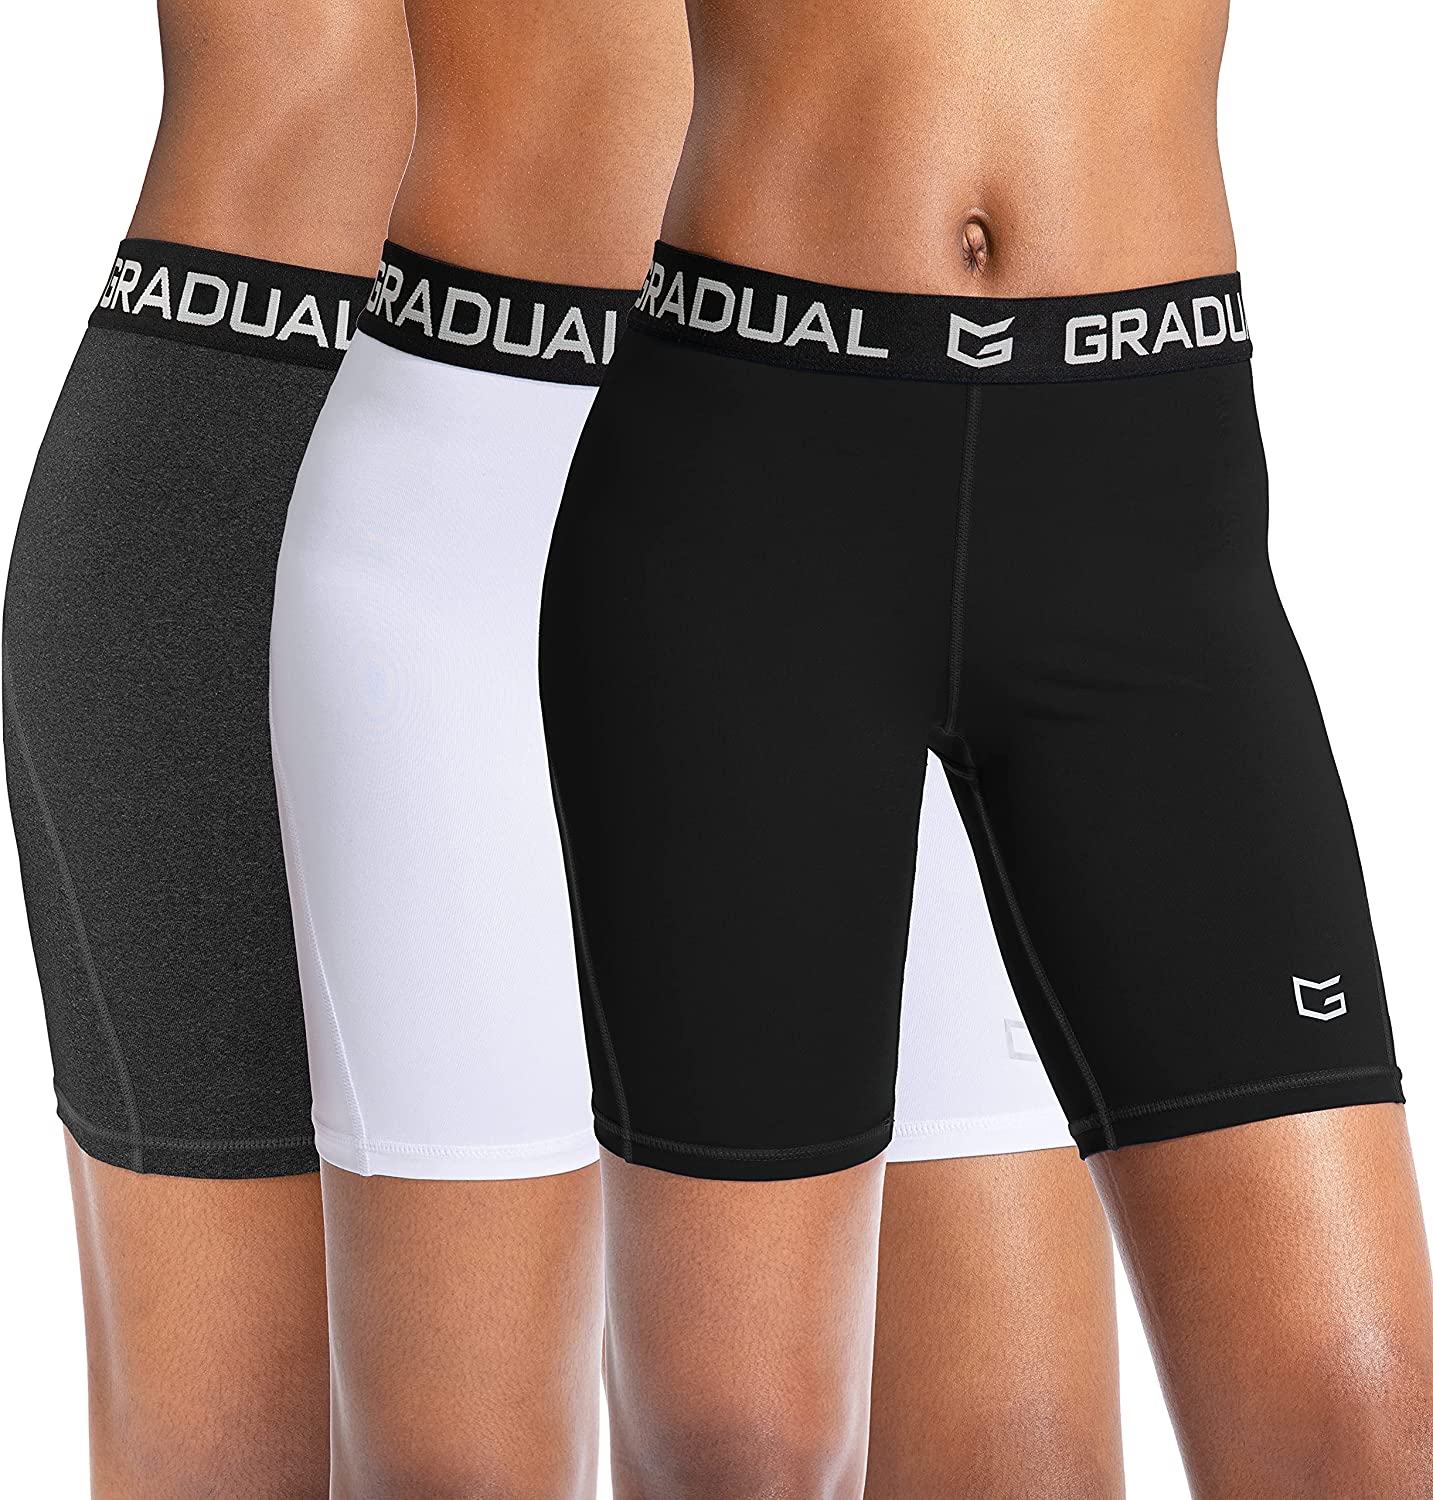 G Gradual Women's Spandex Compression Volleyball Shorts 3 /7 Workout Pro Shorts for Women